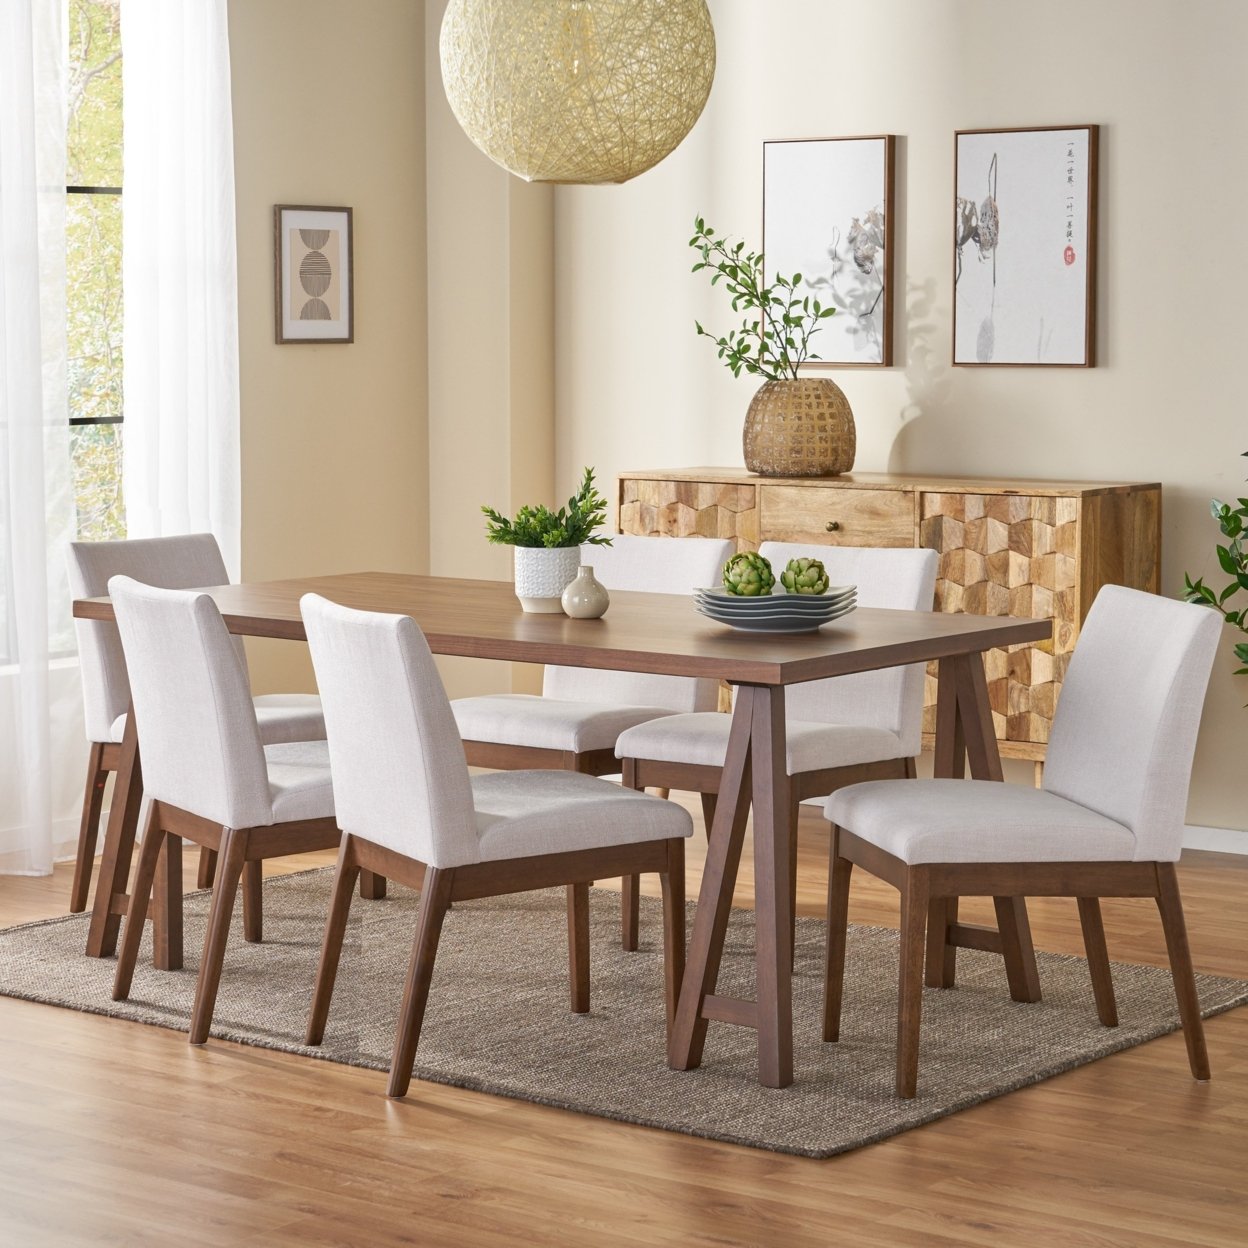 Elsinore Mid-Century Modern 7 Piece Dining Set With A-Frame Table - Light Beige/walnut